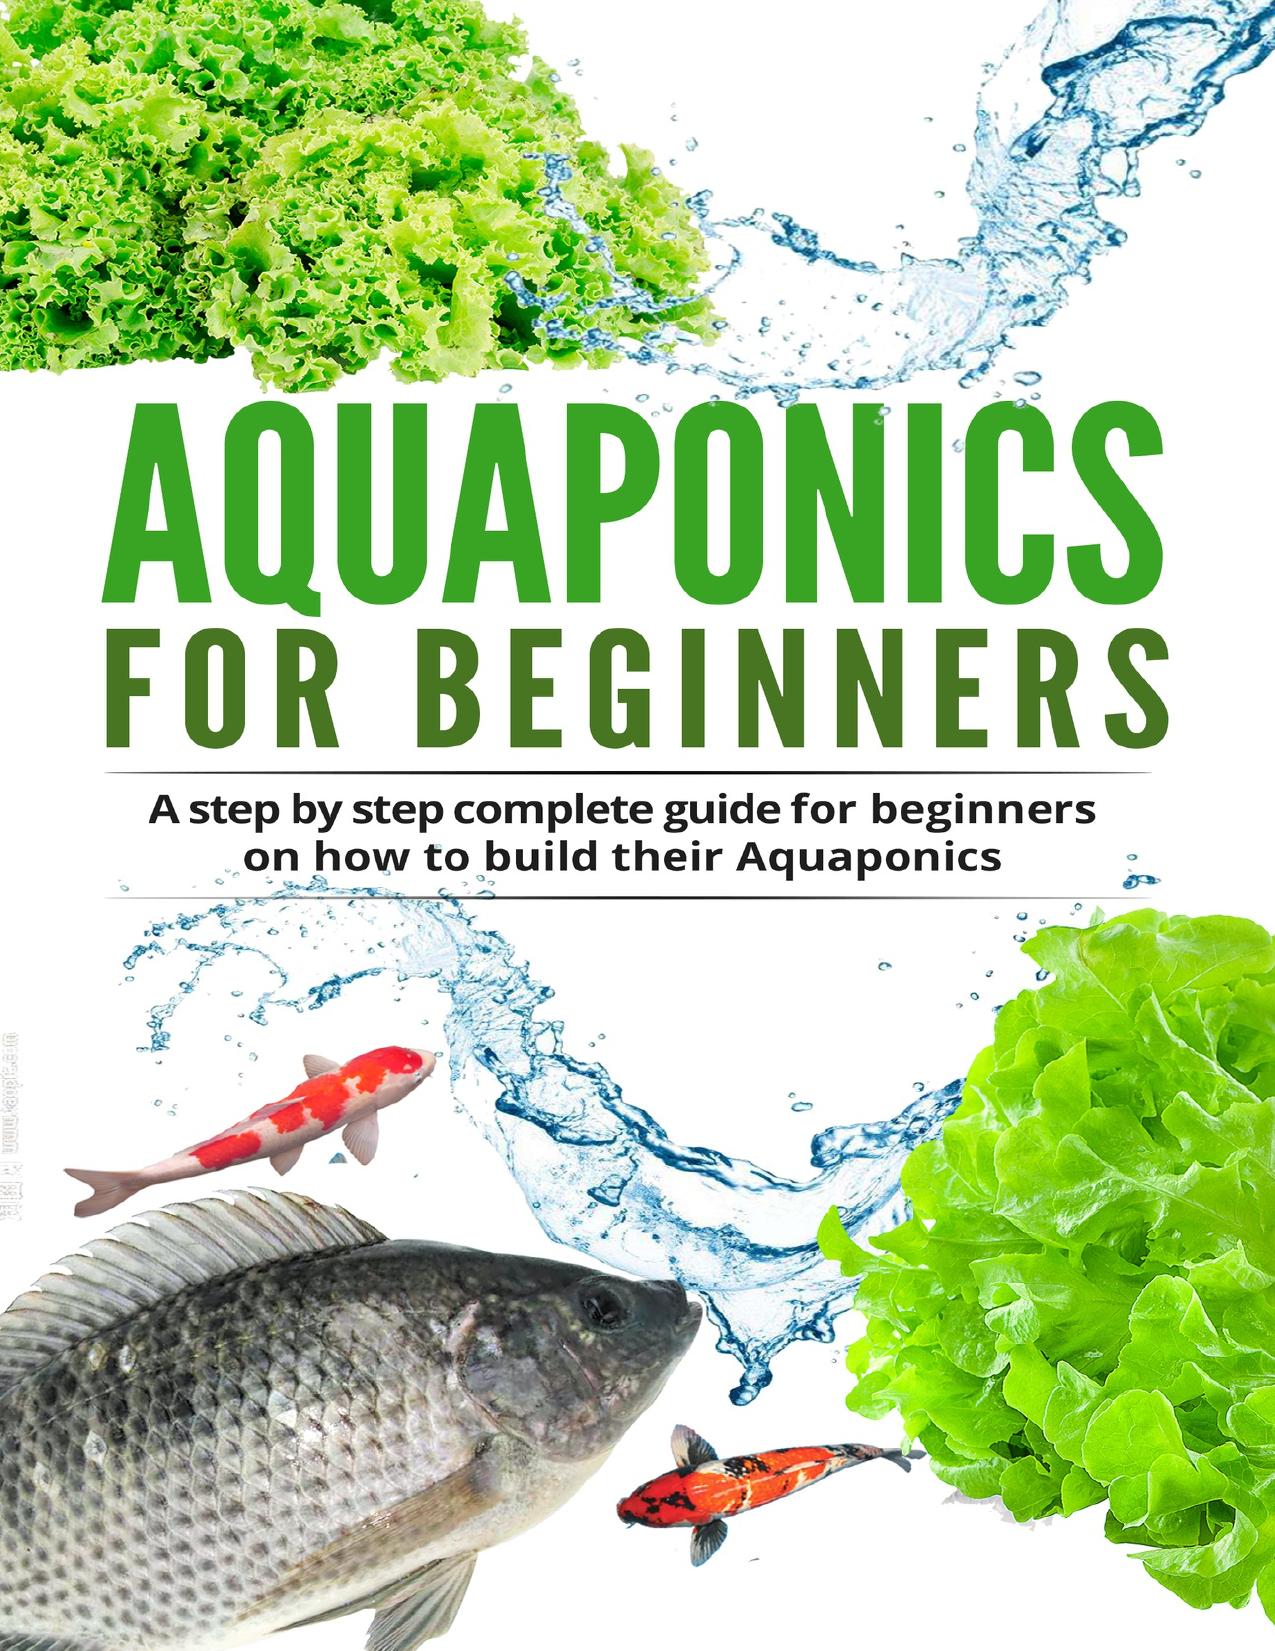 Aquaponic For Beginners: A step by step complete guide for beginners on how to build their Aquaponics by Garret Denis